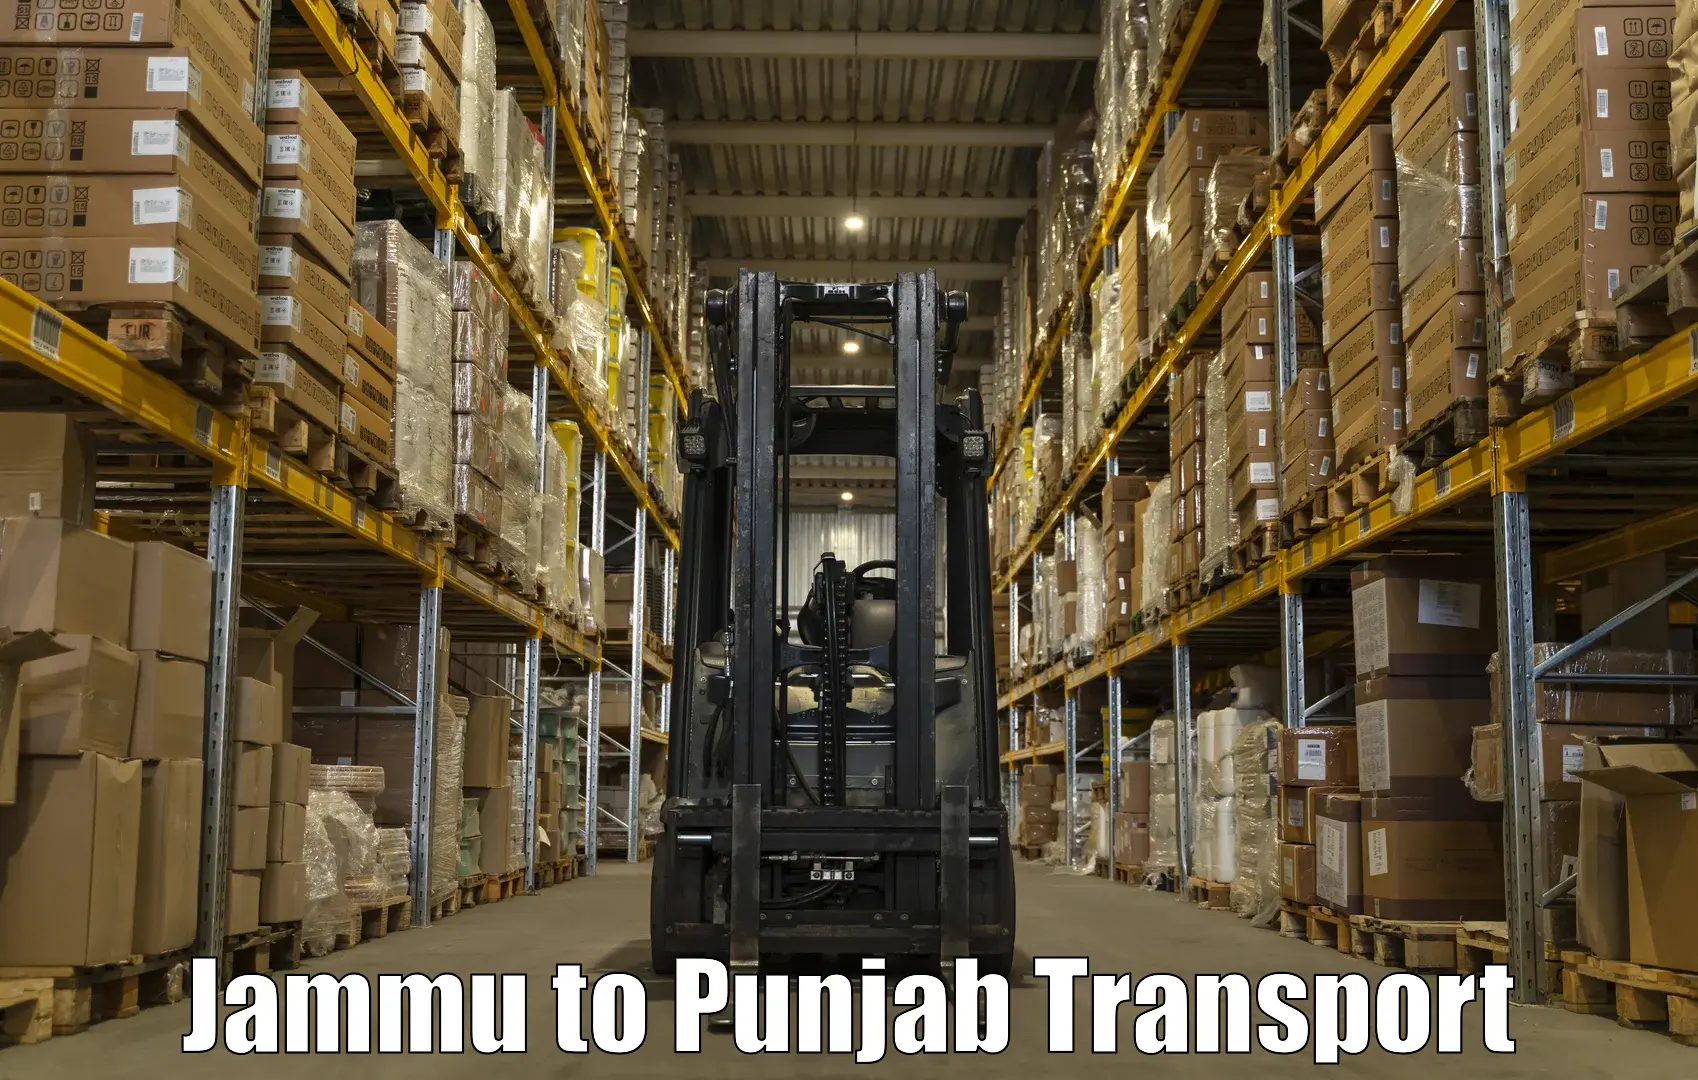 Truck transport companies in India Jammu to Sultanpur Lodhi